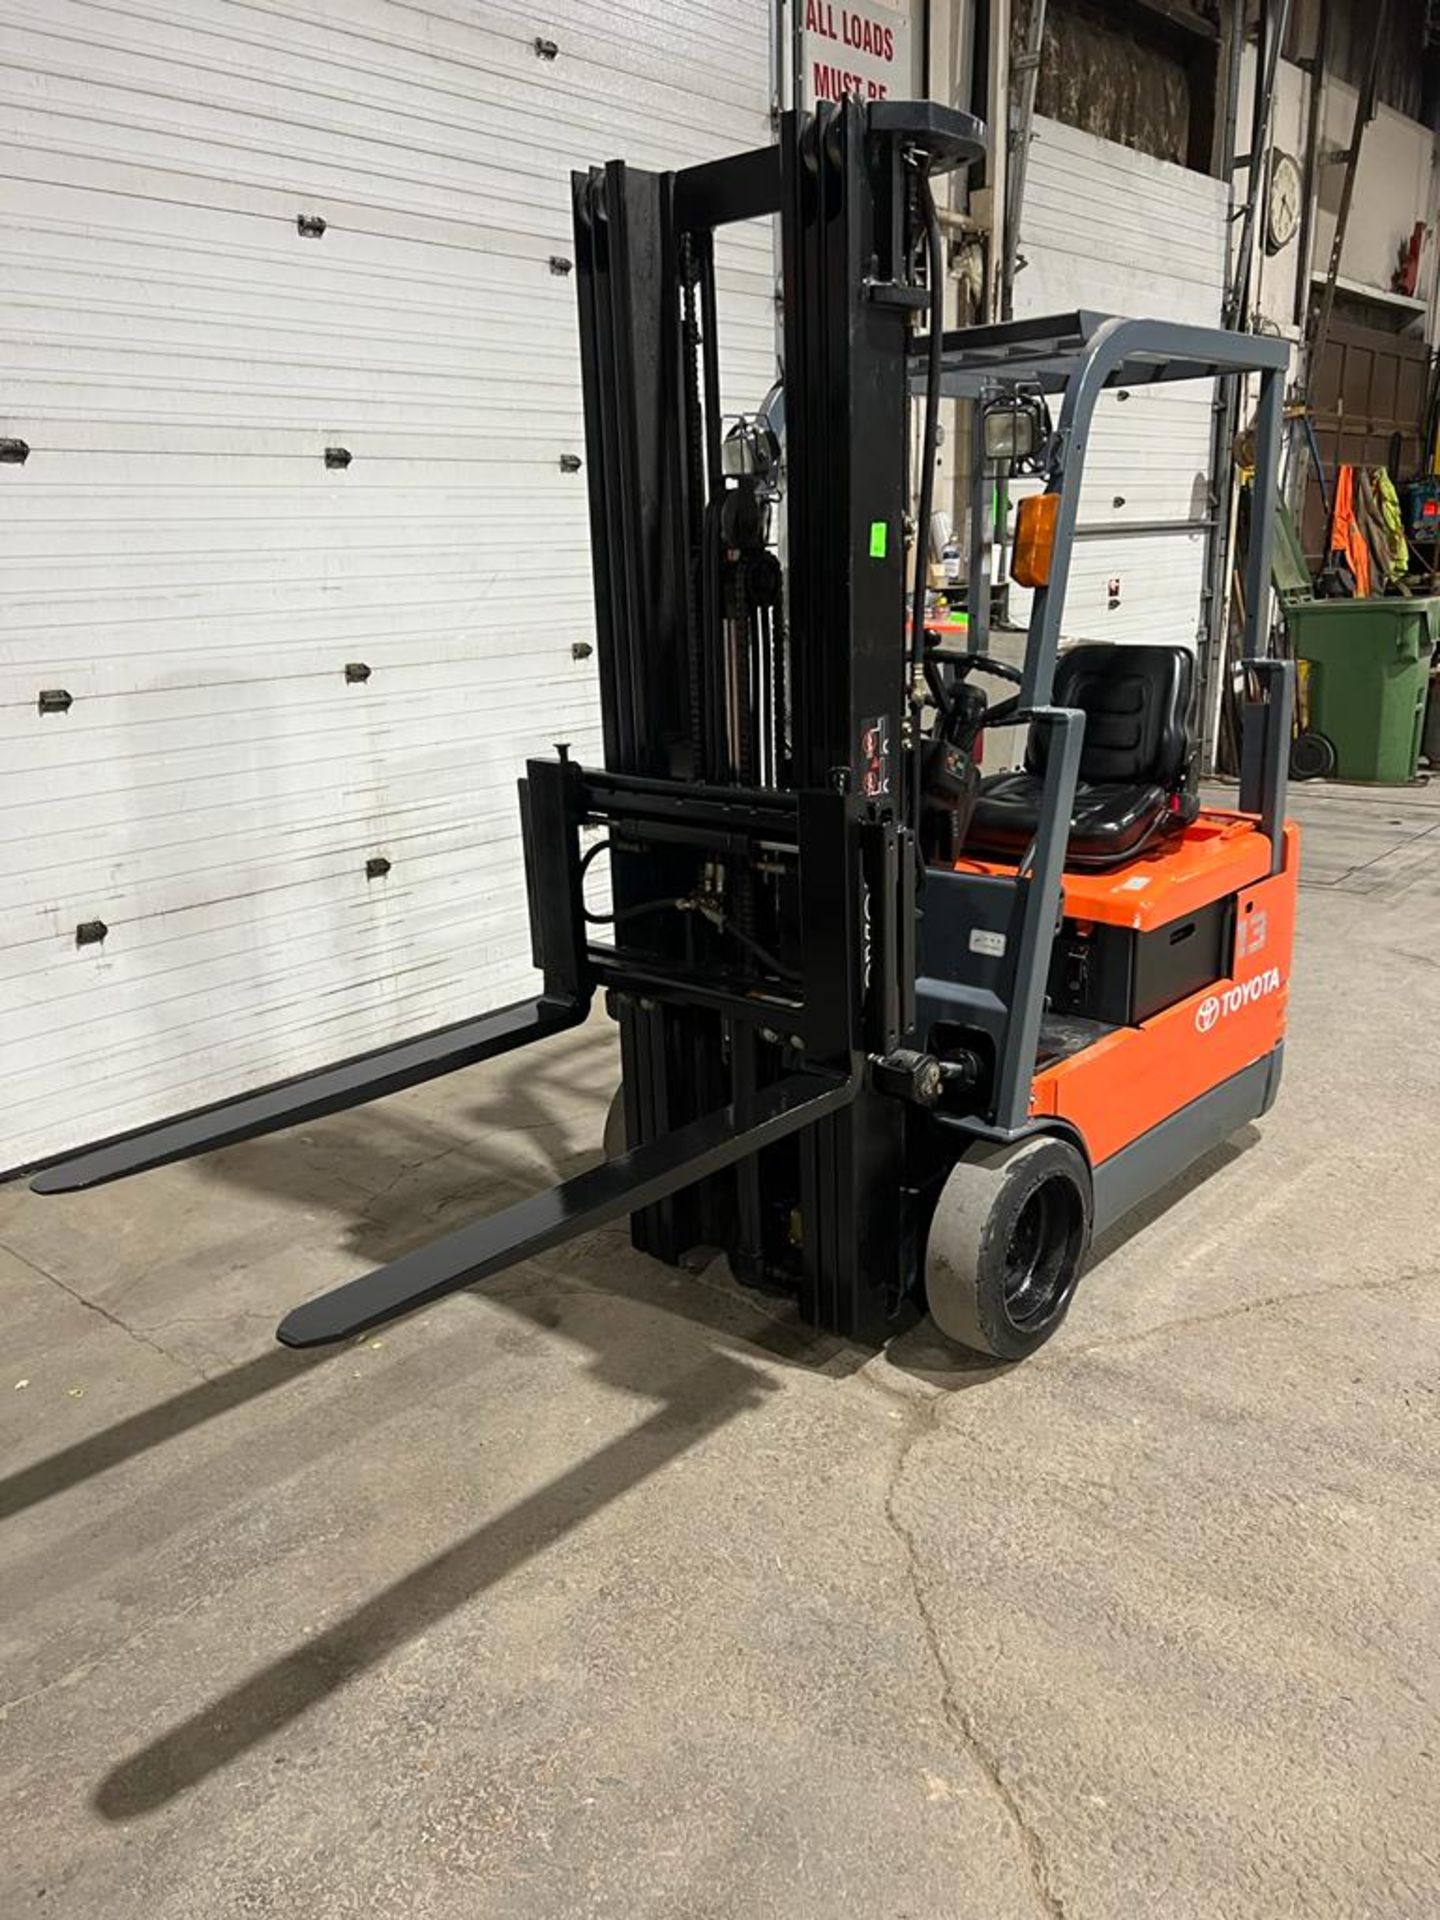 NICE Toyota 2,600lbs Capacity Forklift Electric 36V 3-Wheel with Sideshift 3-stage mast - FREE - Image 2 of 3